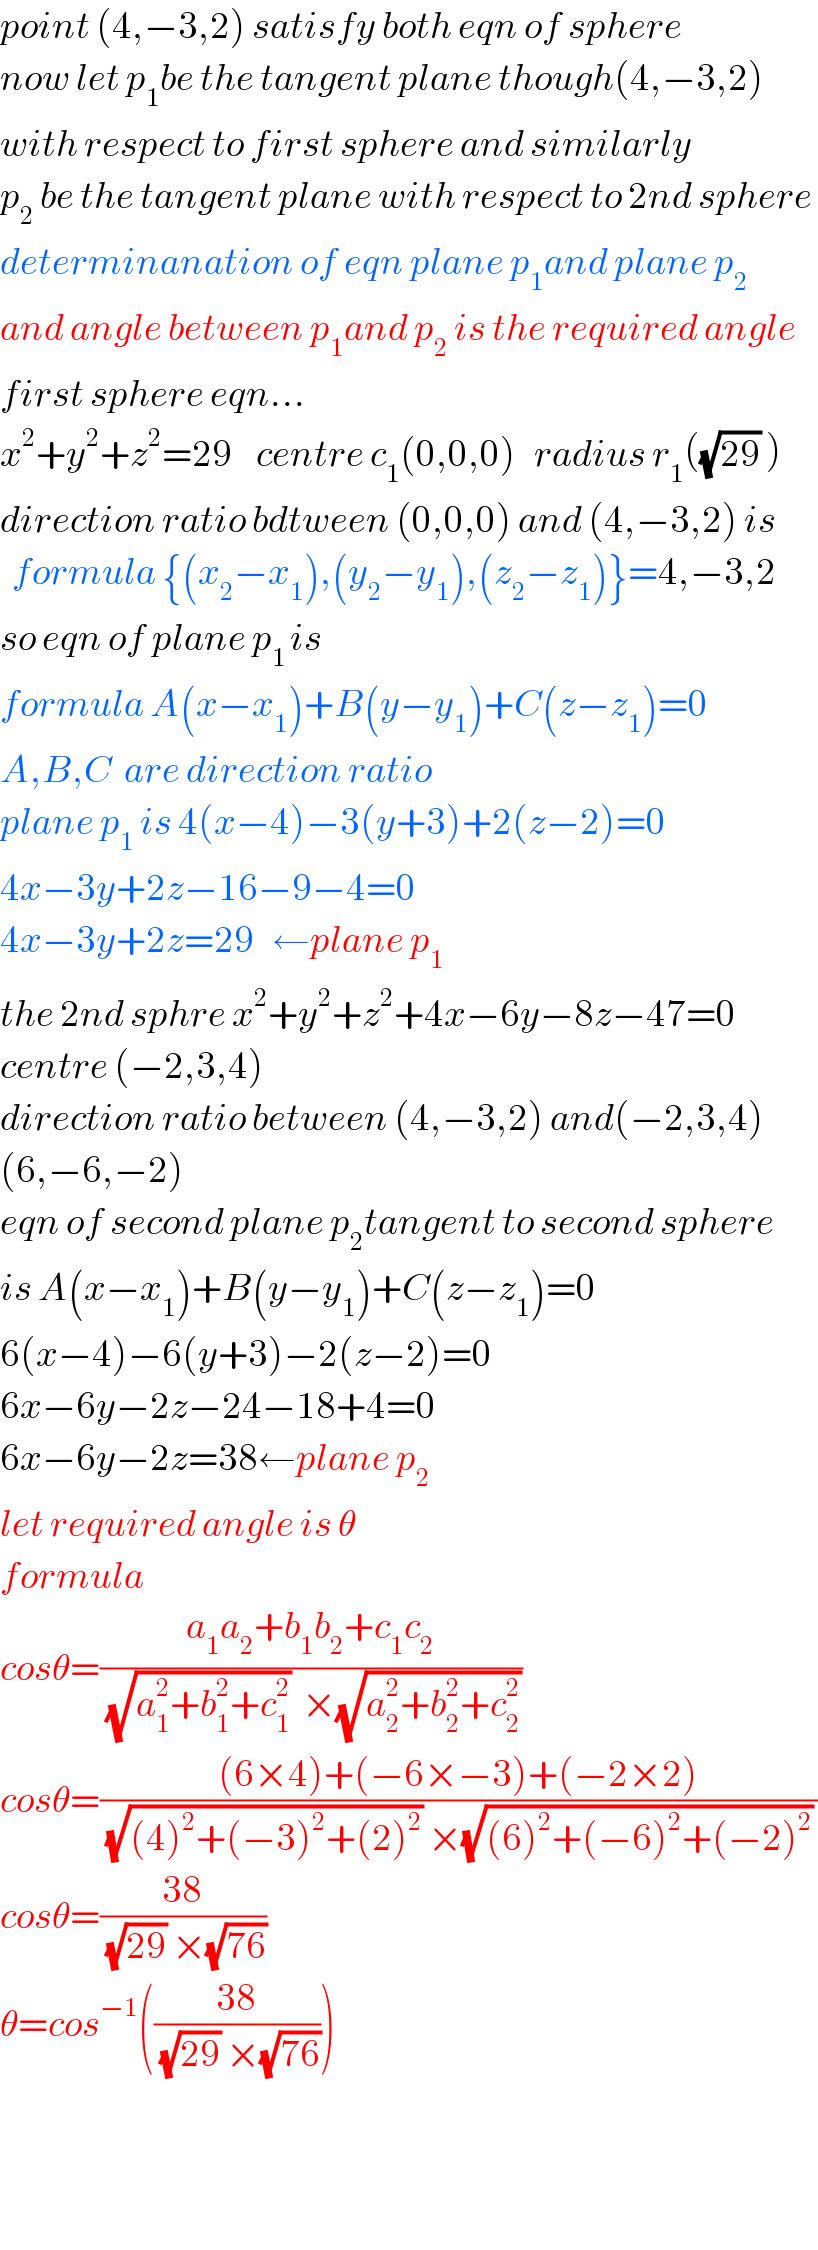 point (4,−3,2) satisfy both eqn of sphere  now let p_1 be the tangent plane though(4,−3,2)  with respect to first sphere and similarly  p_2  be the tangent plane with respect to 2nd sphere  determinanation of eqn plane p_1 and plane p_2   and angle between p_1 and p_2  is the required angle  first sphere eqn...  x^2 +y^2 +z^2 =29    centre c_1 (0,0,0)   radius r_1 ((√(29)) )  direction ratio bdtween (0,0,0) and (4,−3,2) is    formula {(x_2 −x_1 ),(y_2 −y_1 ),(z_2 −z_1 )}=4,−3,2  so eqn of plane p_(1 ) is  formula A(x−x_1 )+B(y−y_1 )+C(z−z_1 )=0  A,B,C  are direction ratio  plane p_1  is 4(x−4)−3(y+3)+2(z−2)=0  4x−3y+2z−16−9−4=0  4x−3y+2z=29   ←plane p_1   the 2nd sphre x^2 +y^2 +z^2 +4x−6y−8z−47=0  centre (−2,3,4)  direction ratio between (4,−3,2) and(−2,3,4)  (6,−6,−2)  eqn of second plane p_2 tangent to second sphere  is A(x−x_1 )+B(y−y_1 )+C(z−z_1 )=0  6(x−4)−6(y+3)−2(z−2)=0  6x−6y−2z−24−18+4=0  6x−6y−2z=38←plane p_2   let required angle is θ  formula  cosθ=((a_1 a_2 +b_1 b_2 +c_1 c_2 )/((√(a_1 ^2 +b_1 ^2 +c_1 ^2 ))  ×(√(a_2 ^2 +b_2 ^2 +c_2 ^2 ))))   cosθ=(((6×4)+(−6×−3)+(−2×2))/((√((4)^2 +(−3)^2 +(2)^2 )) ×(√((6)^2 +(−6)^2 +(−2)^2 )) ))  cosθ=((38)/((√(29)) ×(√(76))))  θ=cos^(−1) (((38)/((√(29)) ×(√(76)))))      